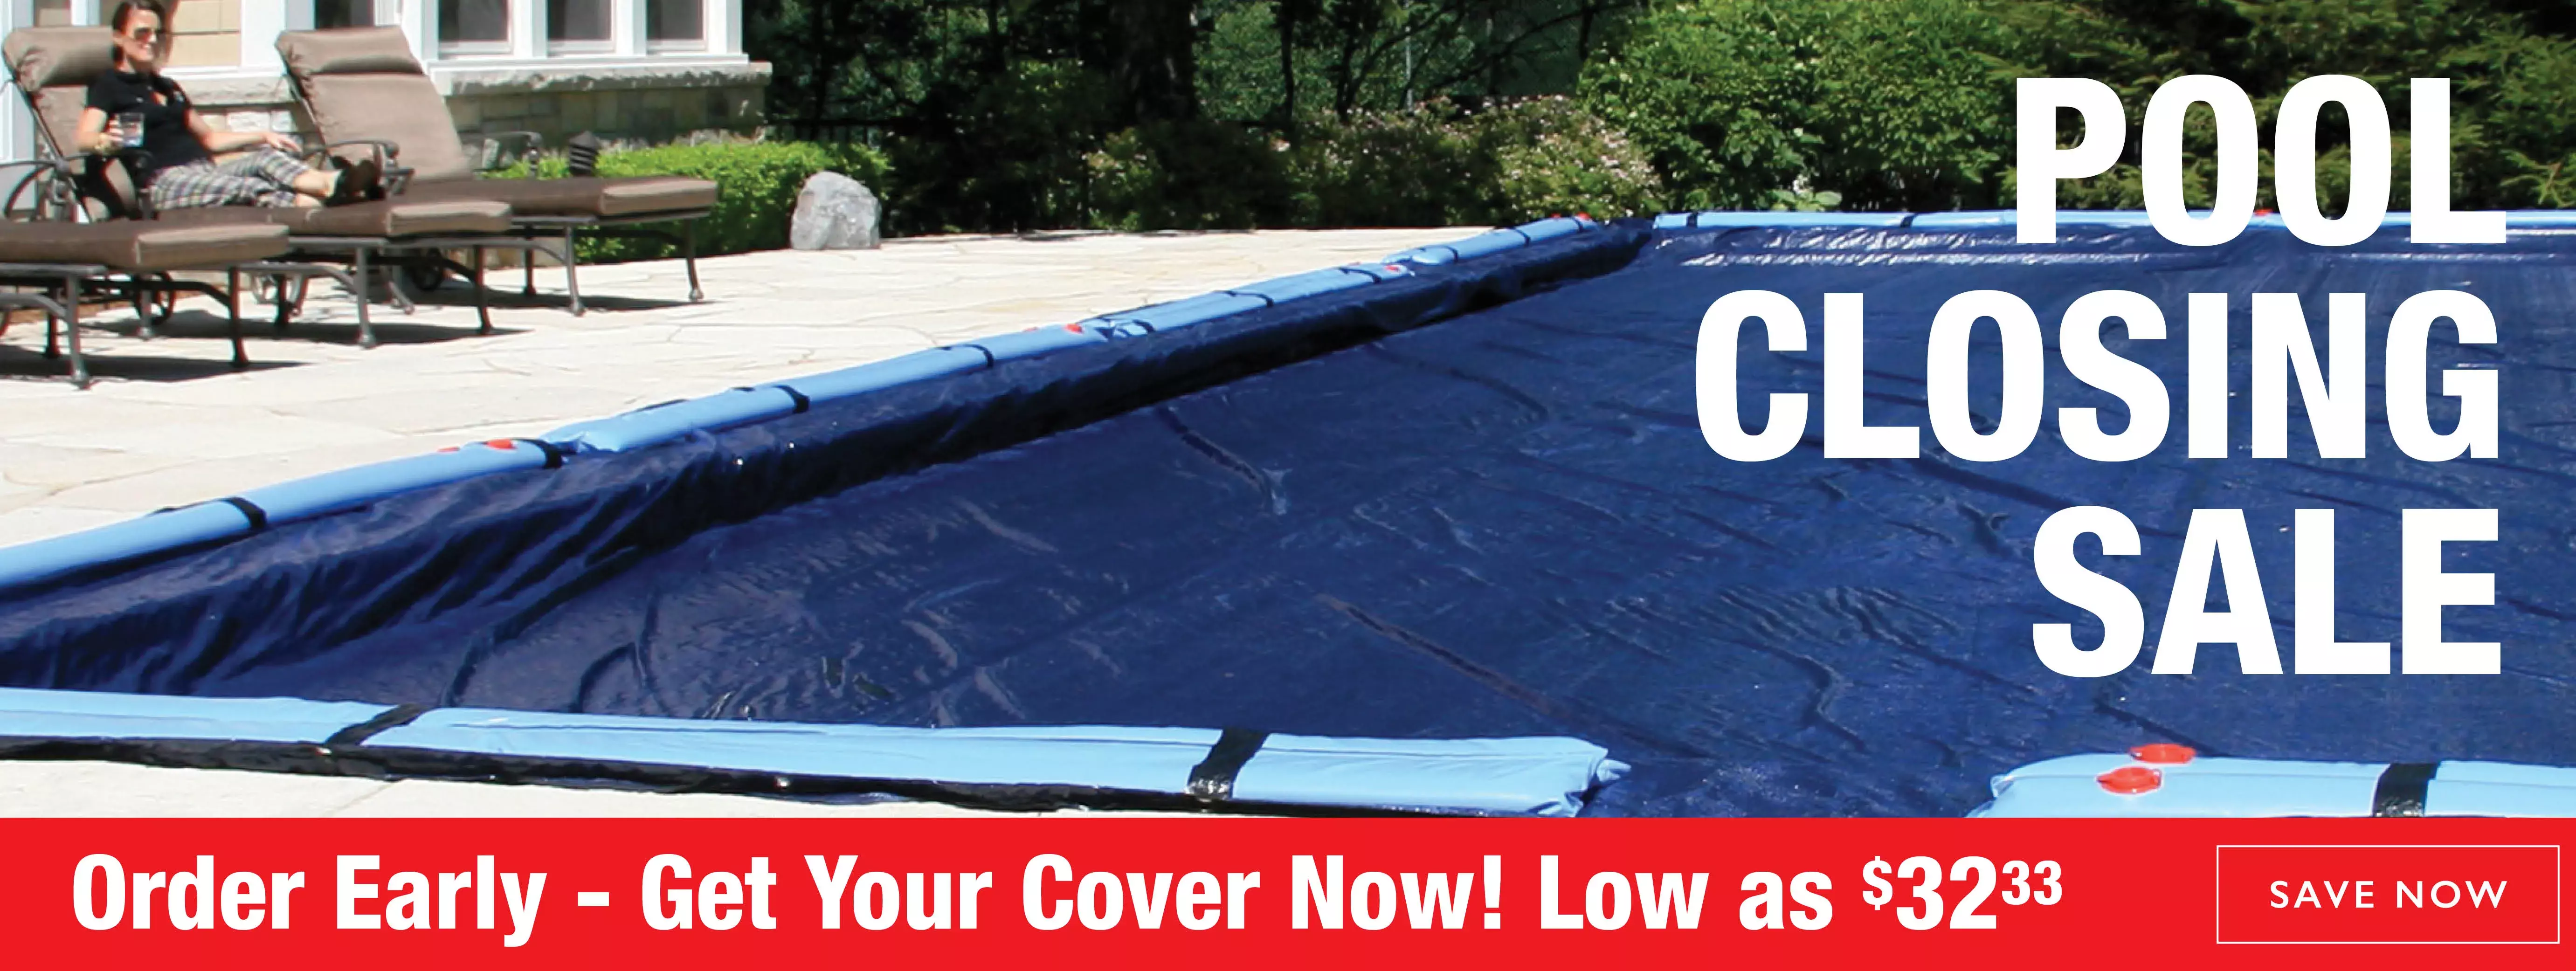 Pool Closing Sale Buy Your Cover Now Low as $32.33